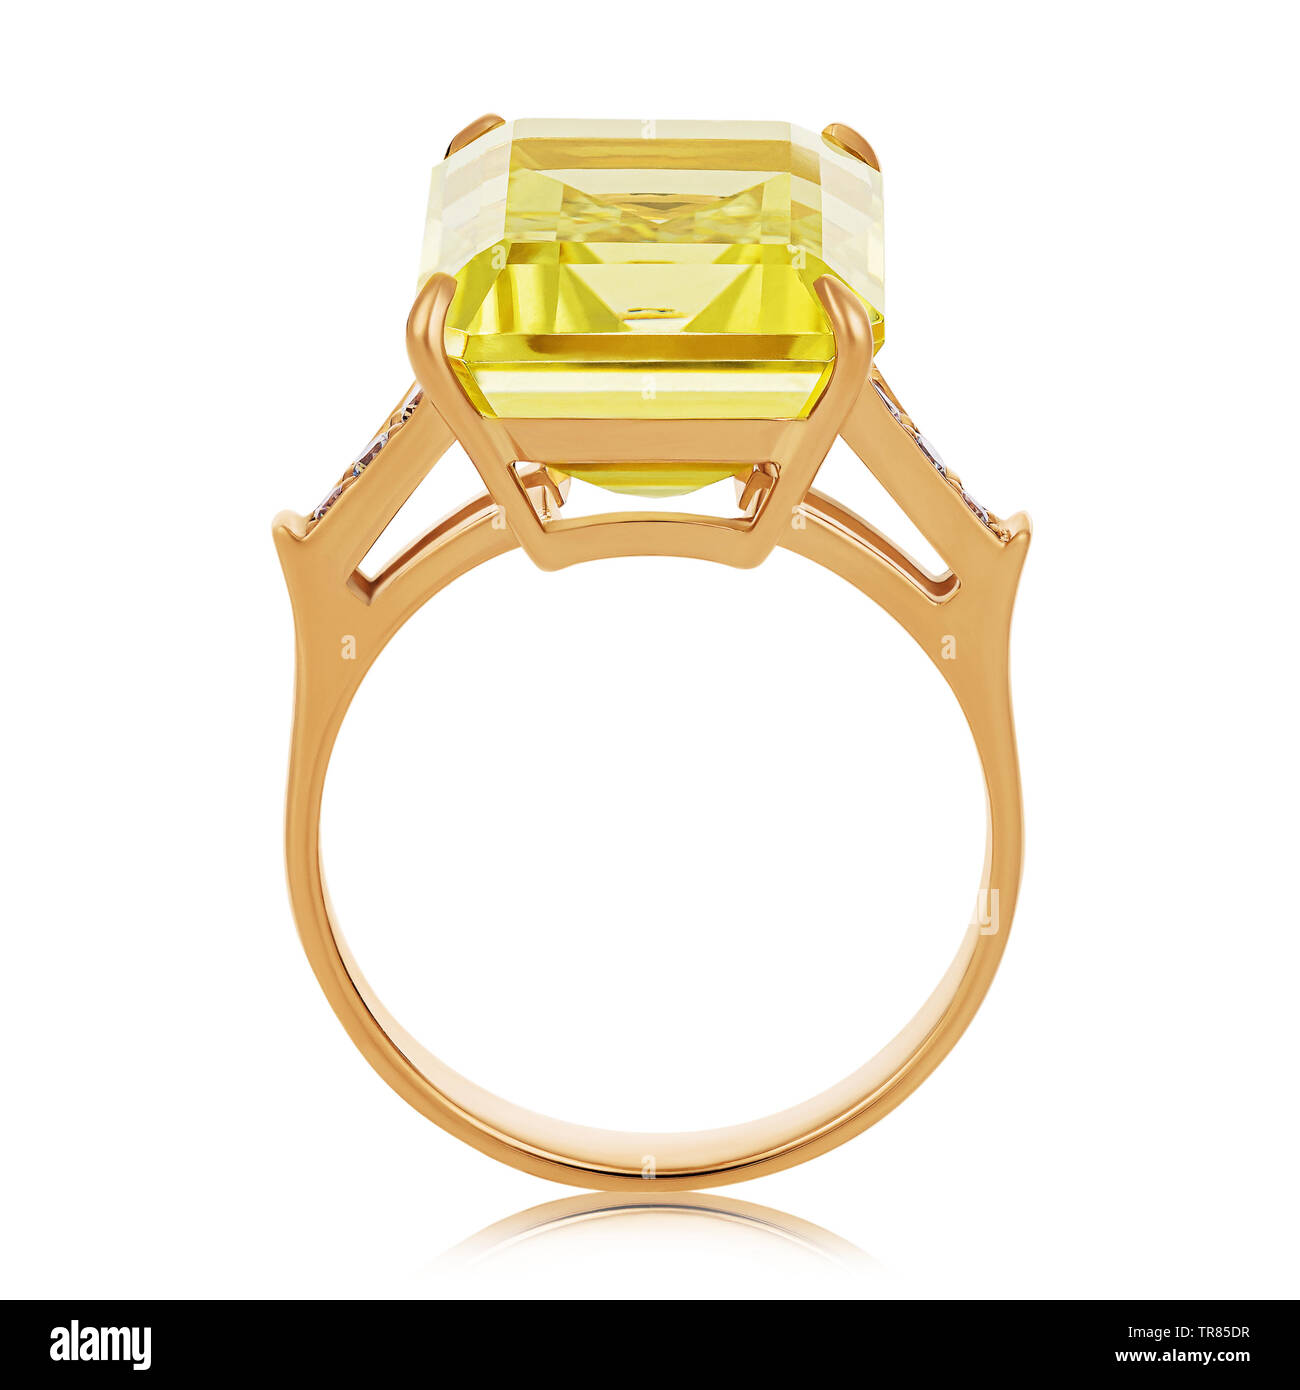 Classics jewelry 7.25 Carat Original Lab Certified Sapphire Natural Yellow  (pila) Gemstone Adjustable Ring Copper Sapphire Gold Plated Ring Price in  India - Buy Classics jewelry 7.25 Carat Original Lab Certified Sapphire